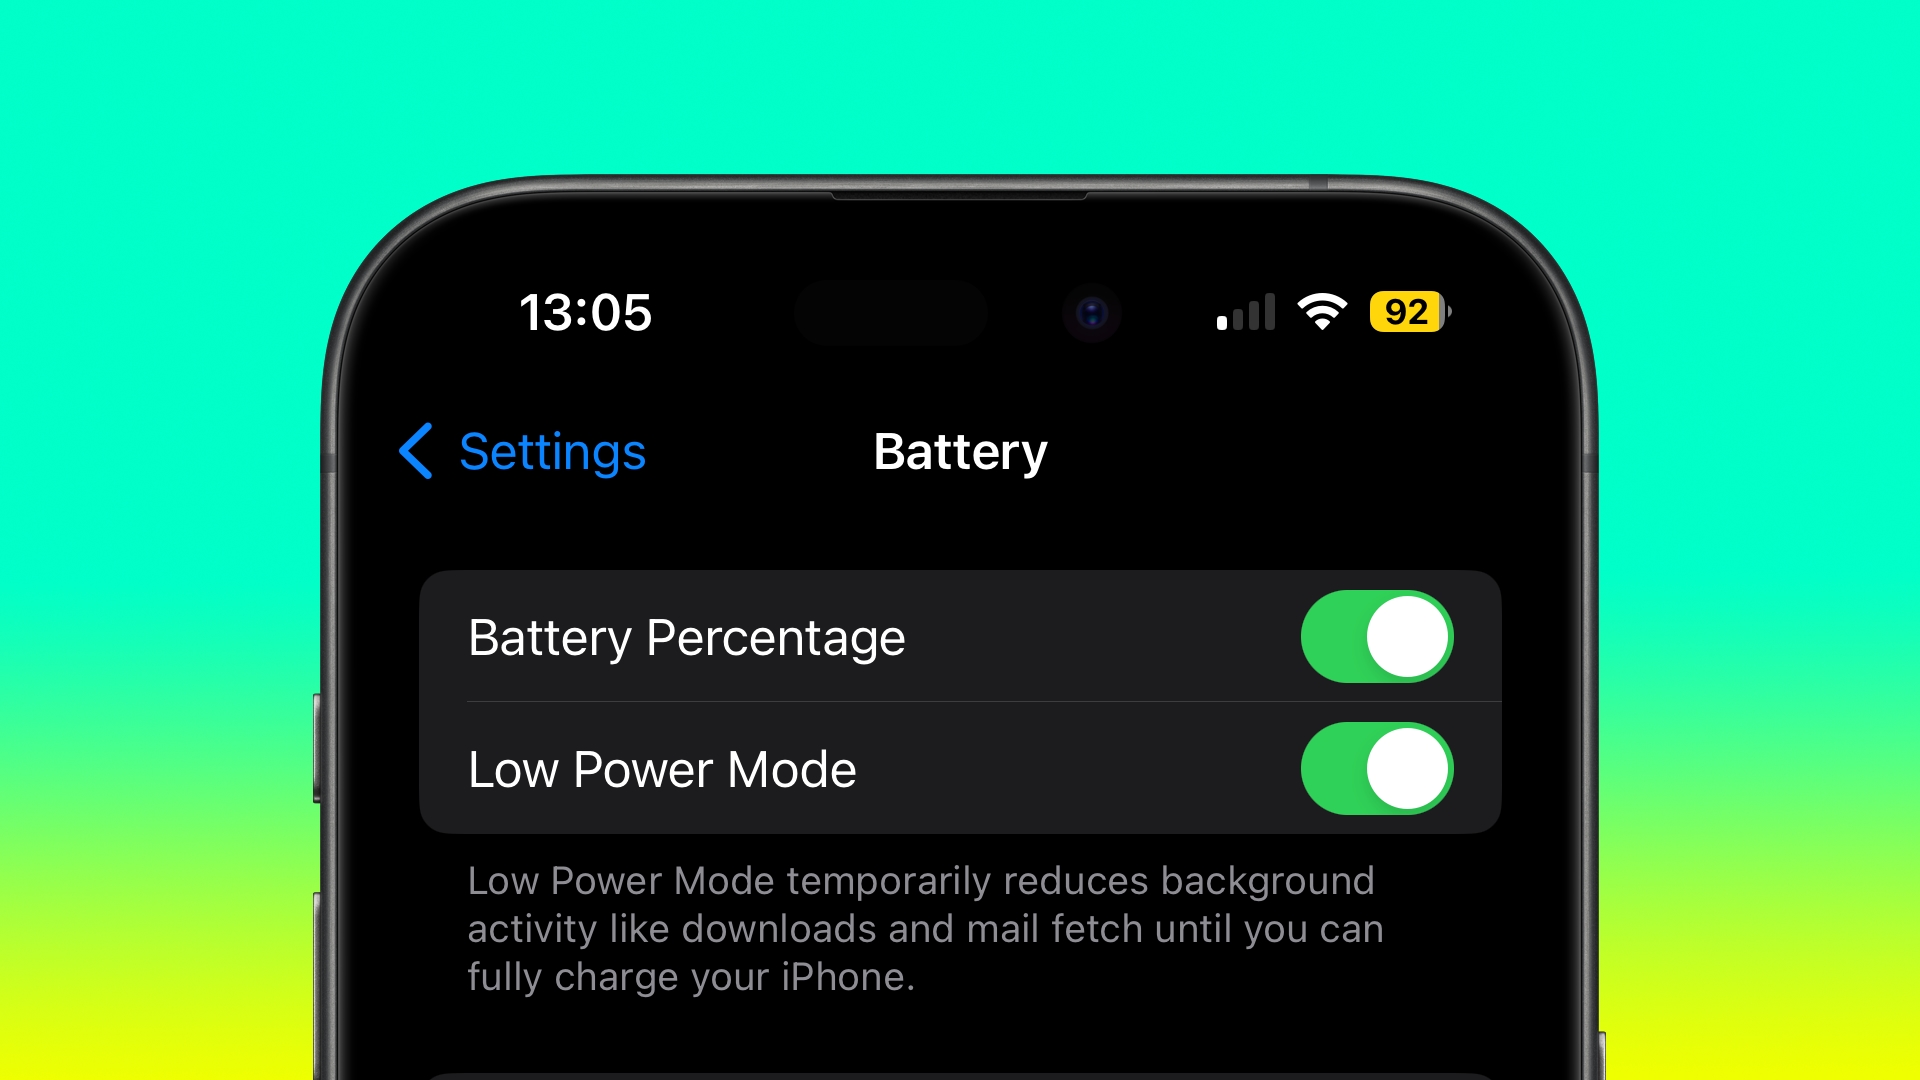 Automatically Trigger iPhone Low Power Mode Earlier